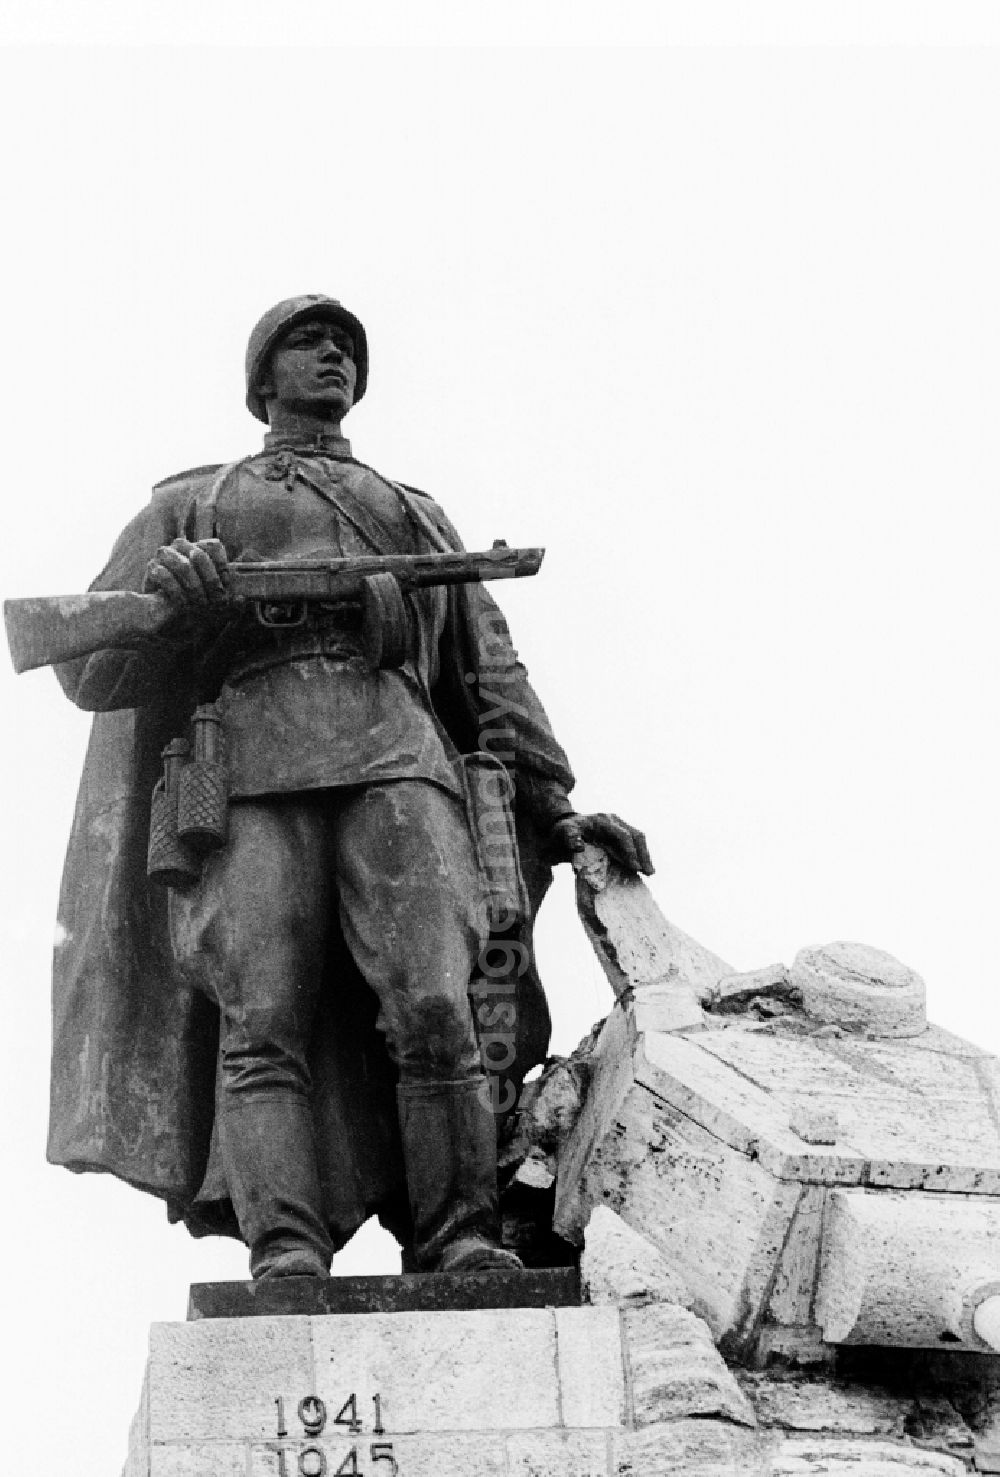 Seelow: Monument to the fallen russian soldiers by Lew Kerbel, at the Memorial Seelow Heights in Seelow, in the present state of Brandenburg. The bronze figure depicts a Red Army soldier with a submachine gun, standing next to the tower of a destroyed German tank